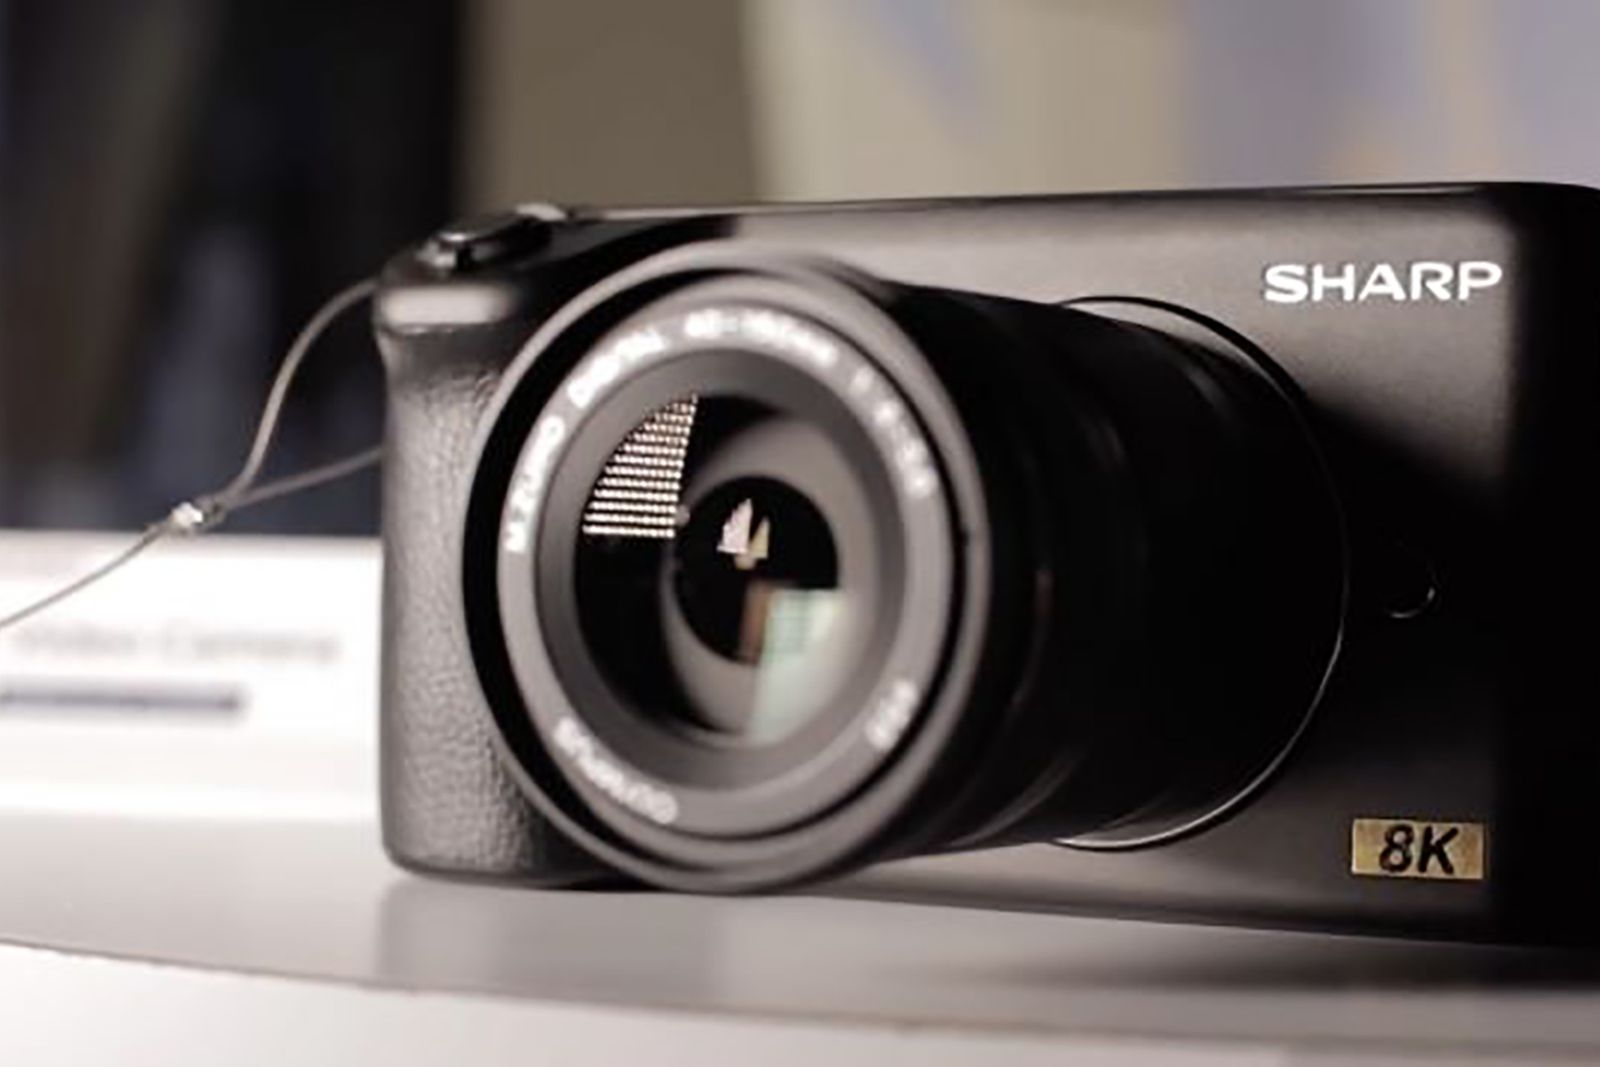 Sharp quietly revealed an 8K consumer video cinema at CES 2019 image 1